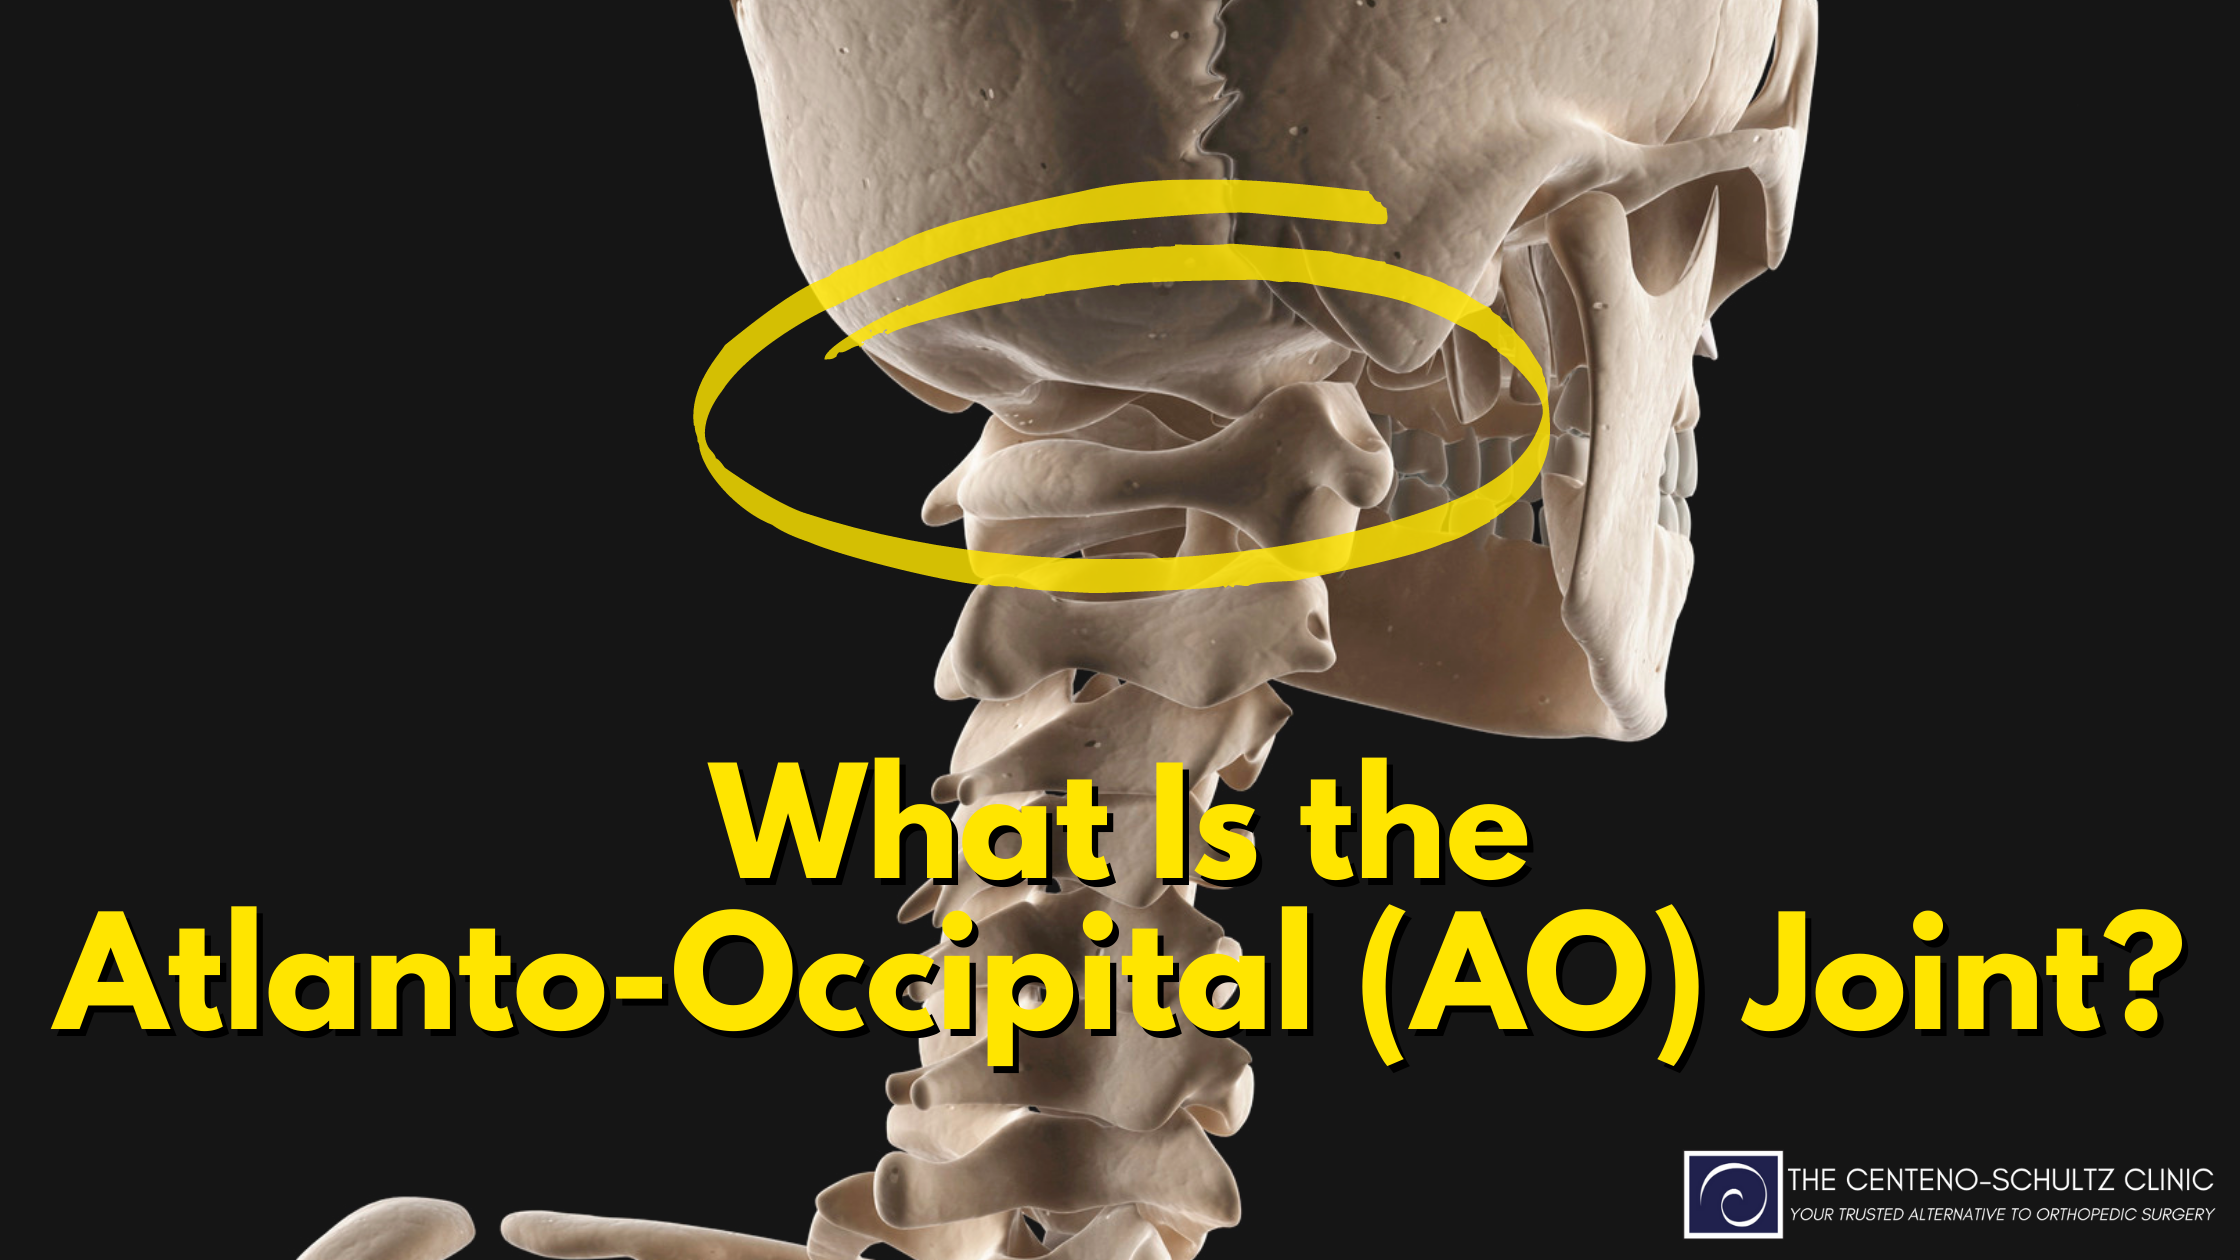 what is the Atlanto-Occipital joint